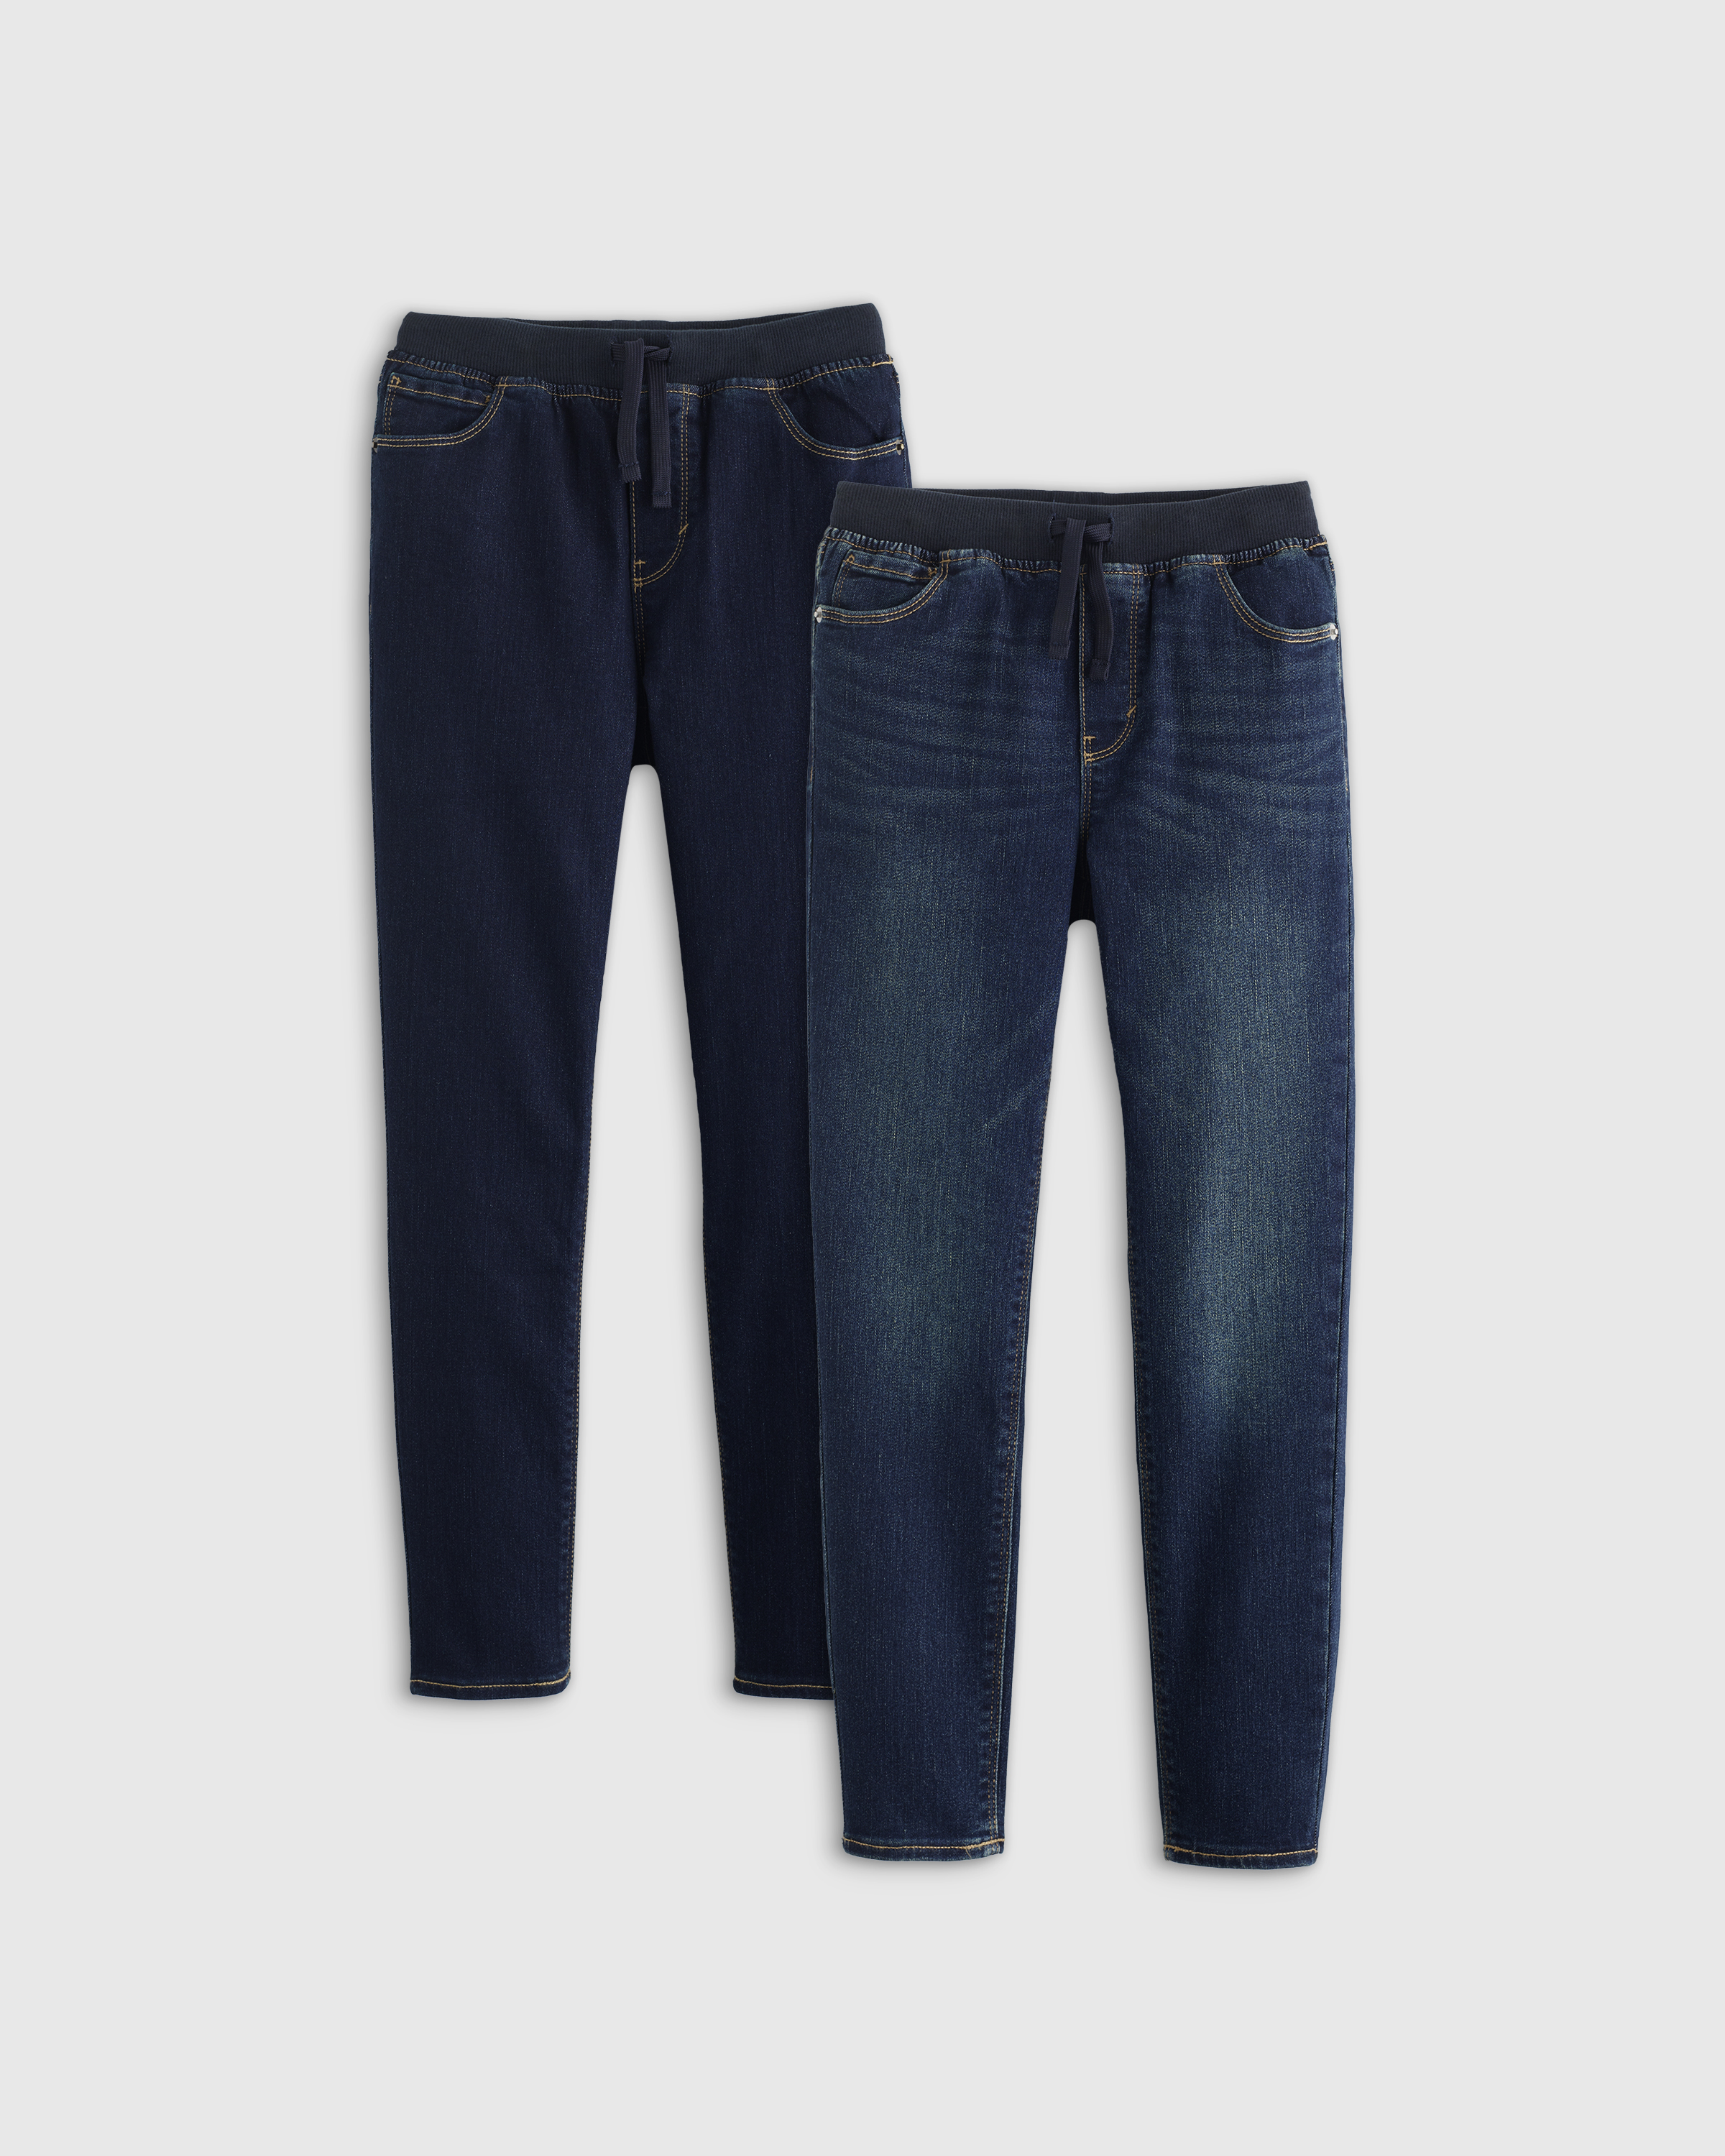 Purchase Wholesale spanx jeans. Free Returns & Net 60 Terms on Faire